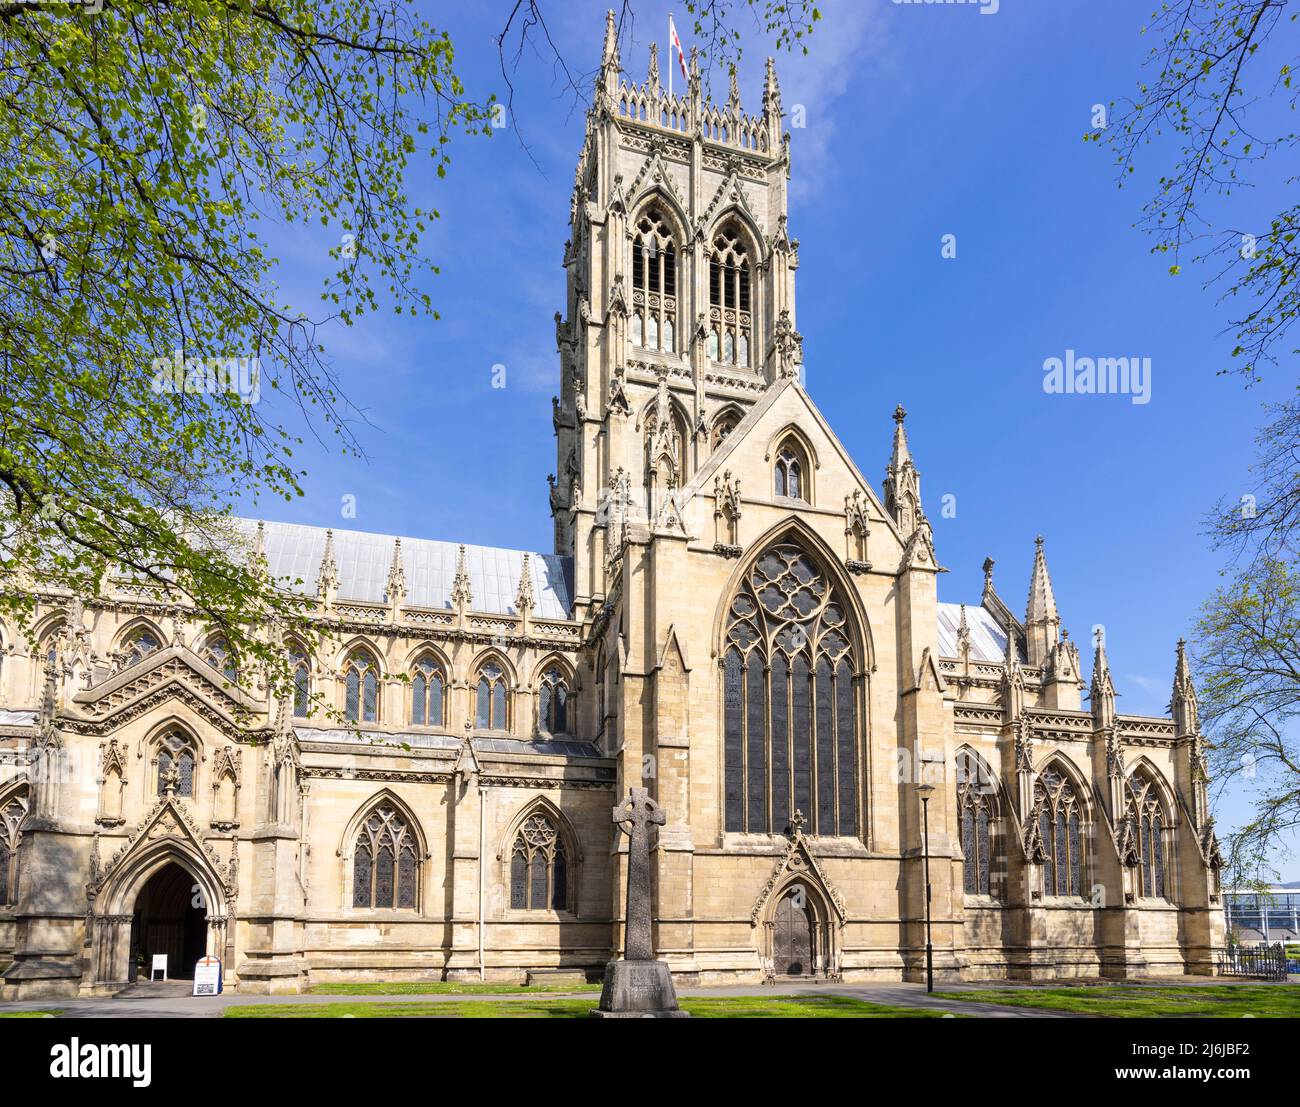 The Minster Church of St George ou Doncaster Minster Doncaster South Yorkshire Angleterre gb Europe Banque D'Images